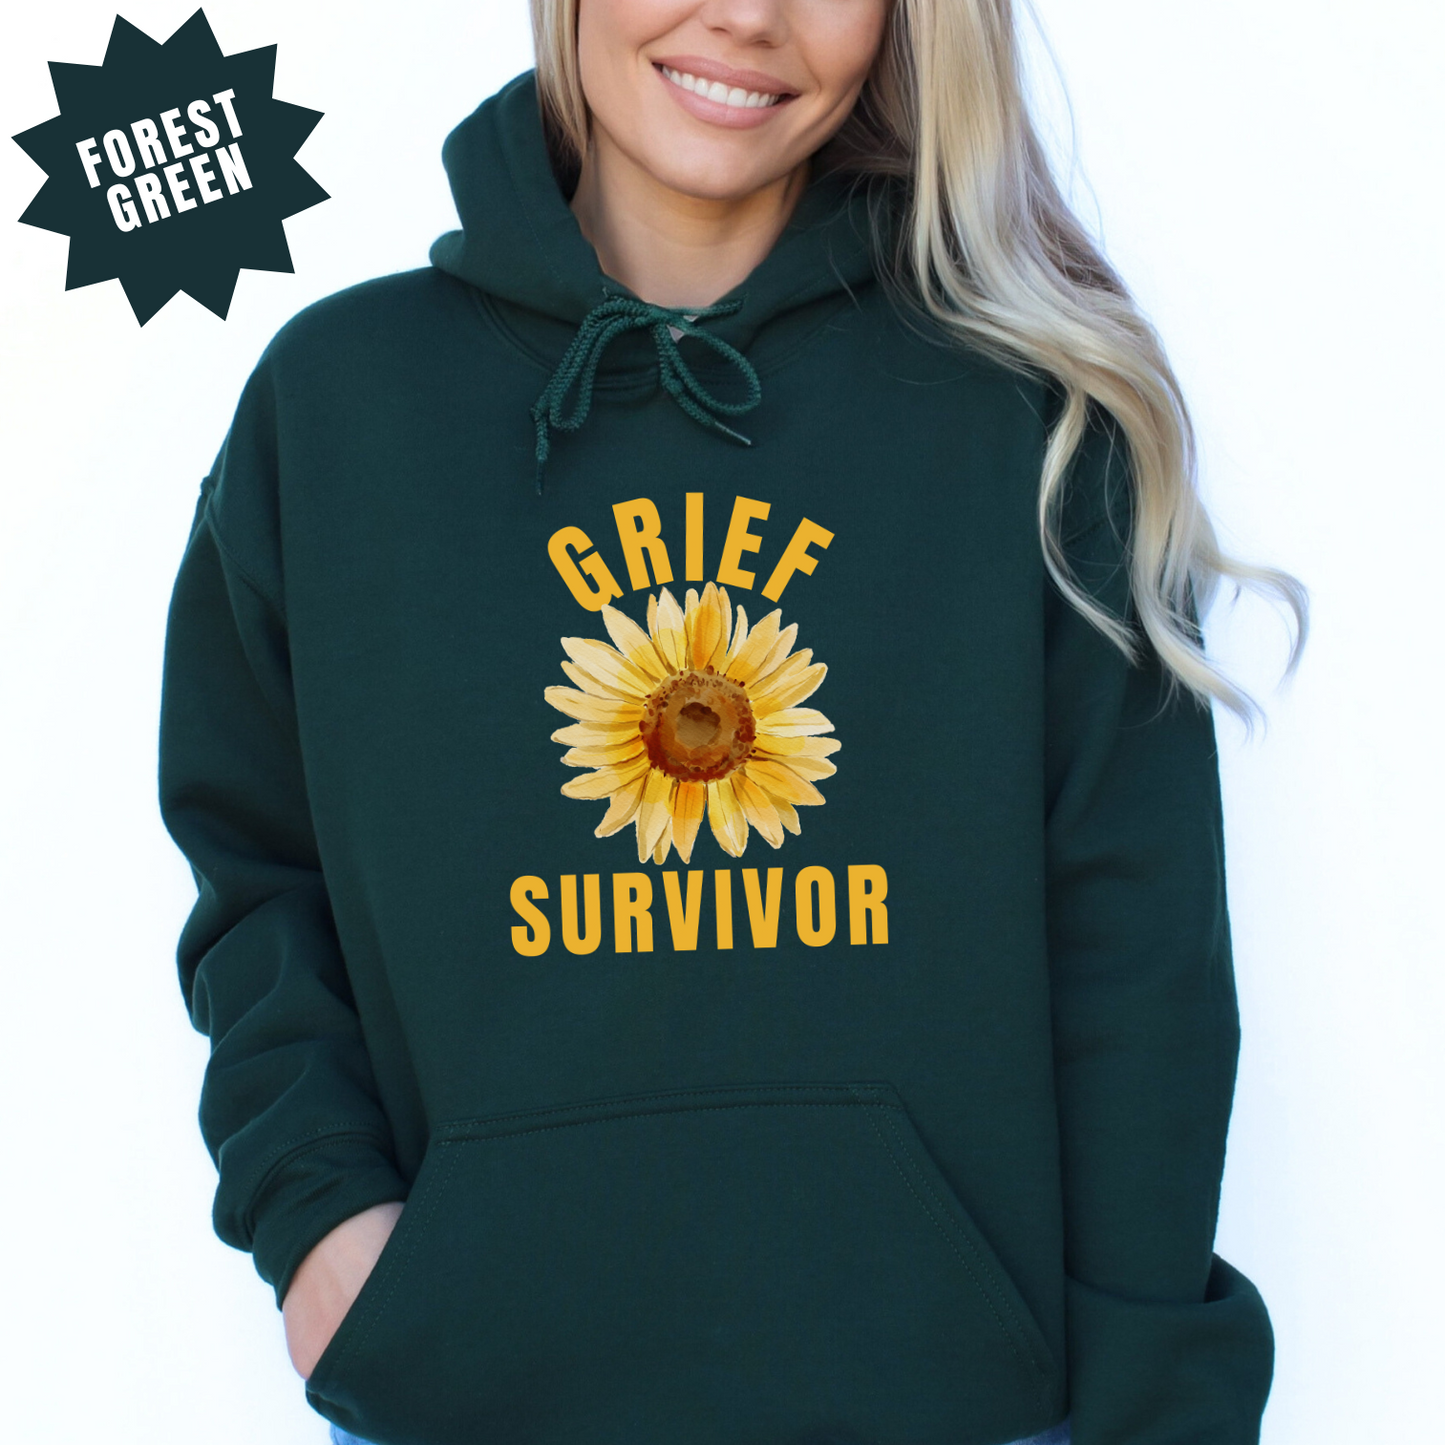 "Grief Survivor" hoodie sweatshirt with a bright sunflower, symbolizing strength and hope during times of grief. Gildan 18500 hoodie sweatshirt in Forest Green.